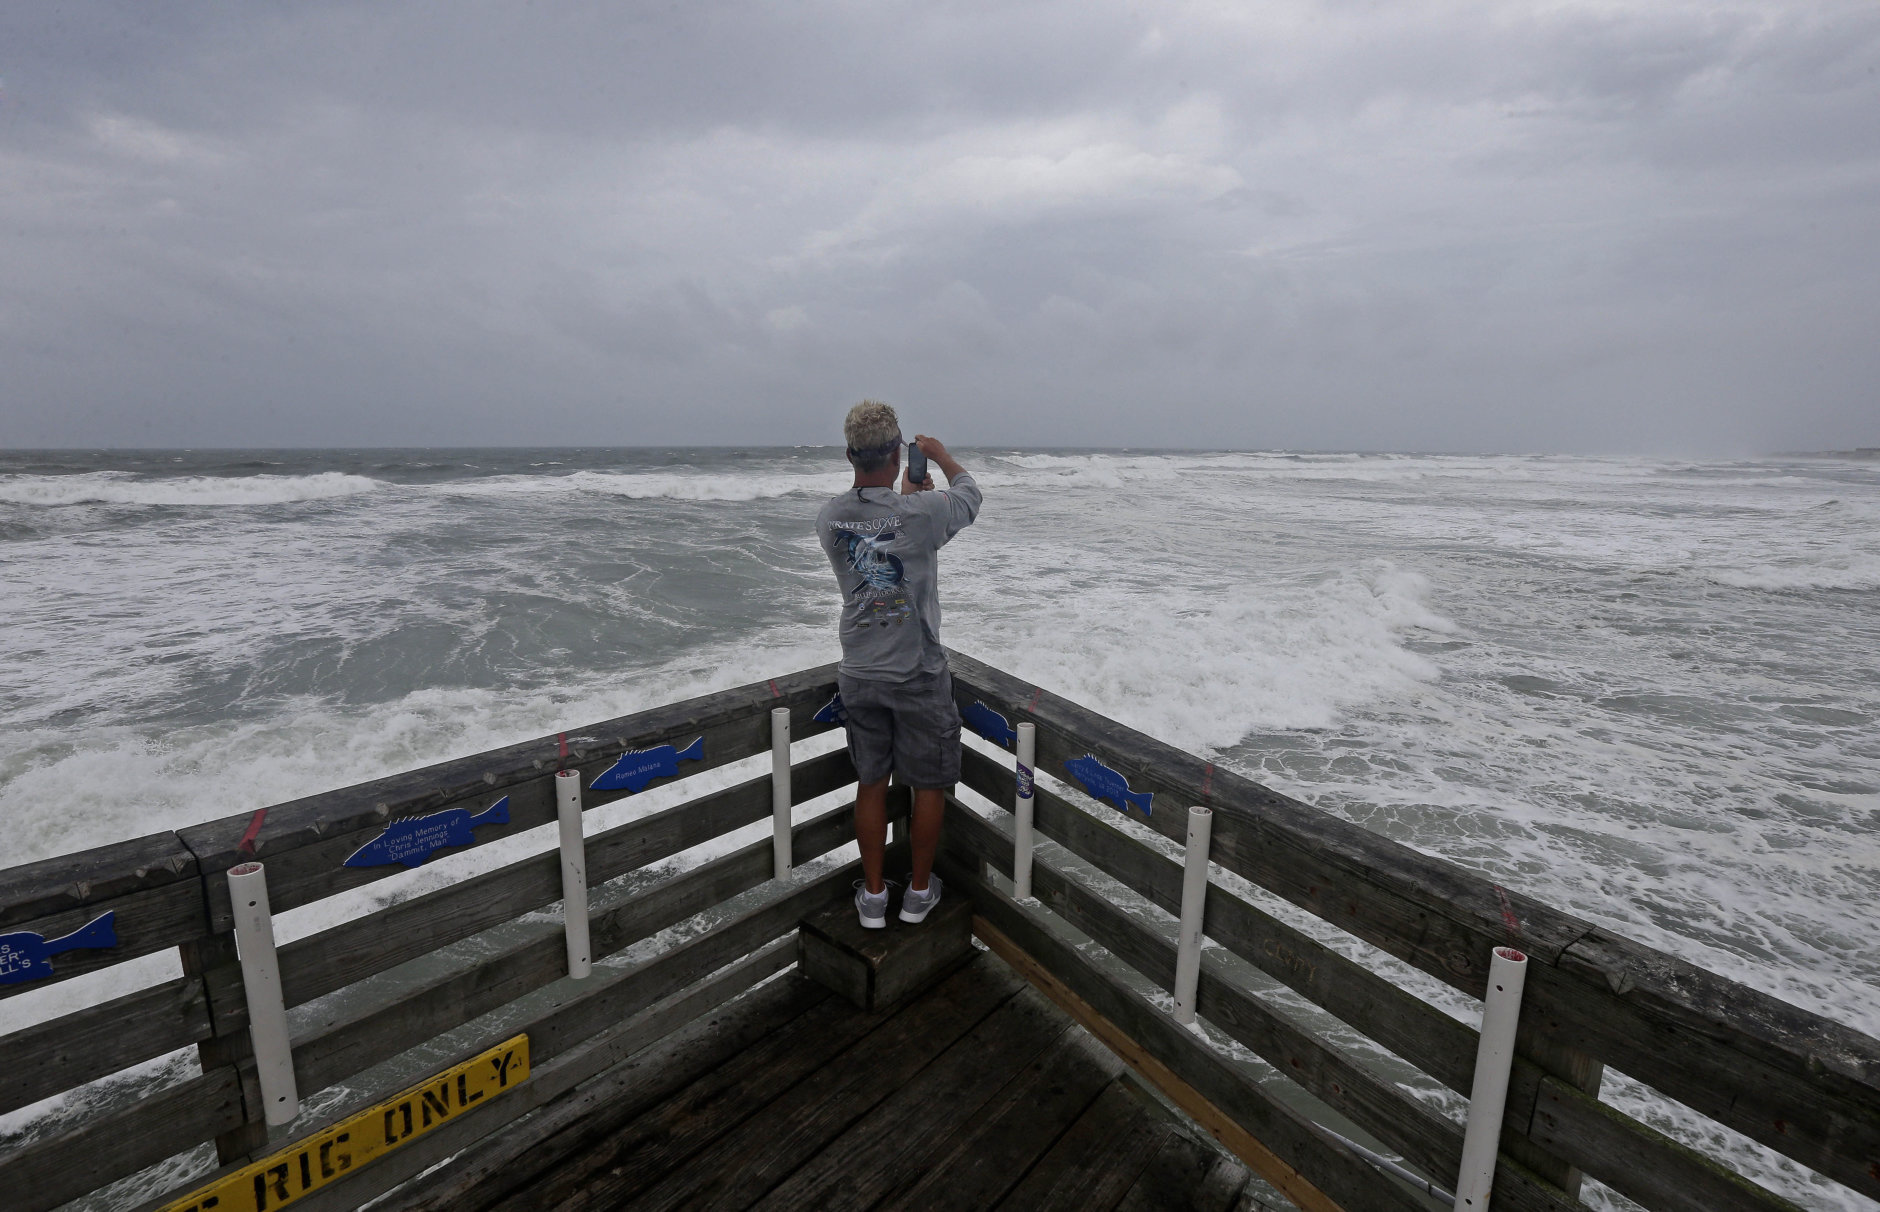 Patrick Wells looks out over the Atlantic ocean at the Avalon Fishing Pier in Kill Devil Hills, N.C., Thursday, Sept. 13, 2018 as Hurricane Florence approaches the east coast. (AP Photo/Gerry Broome)